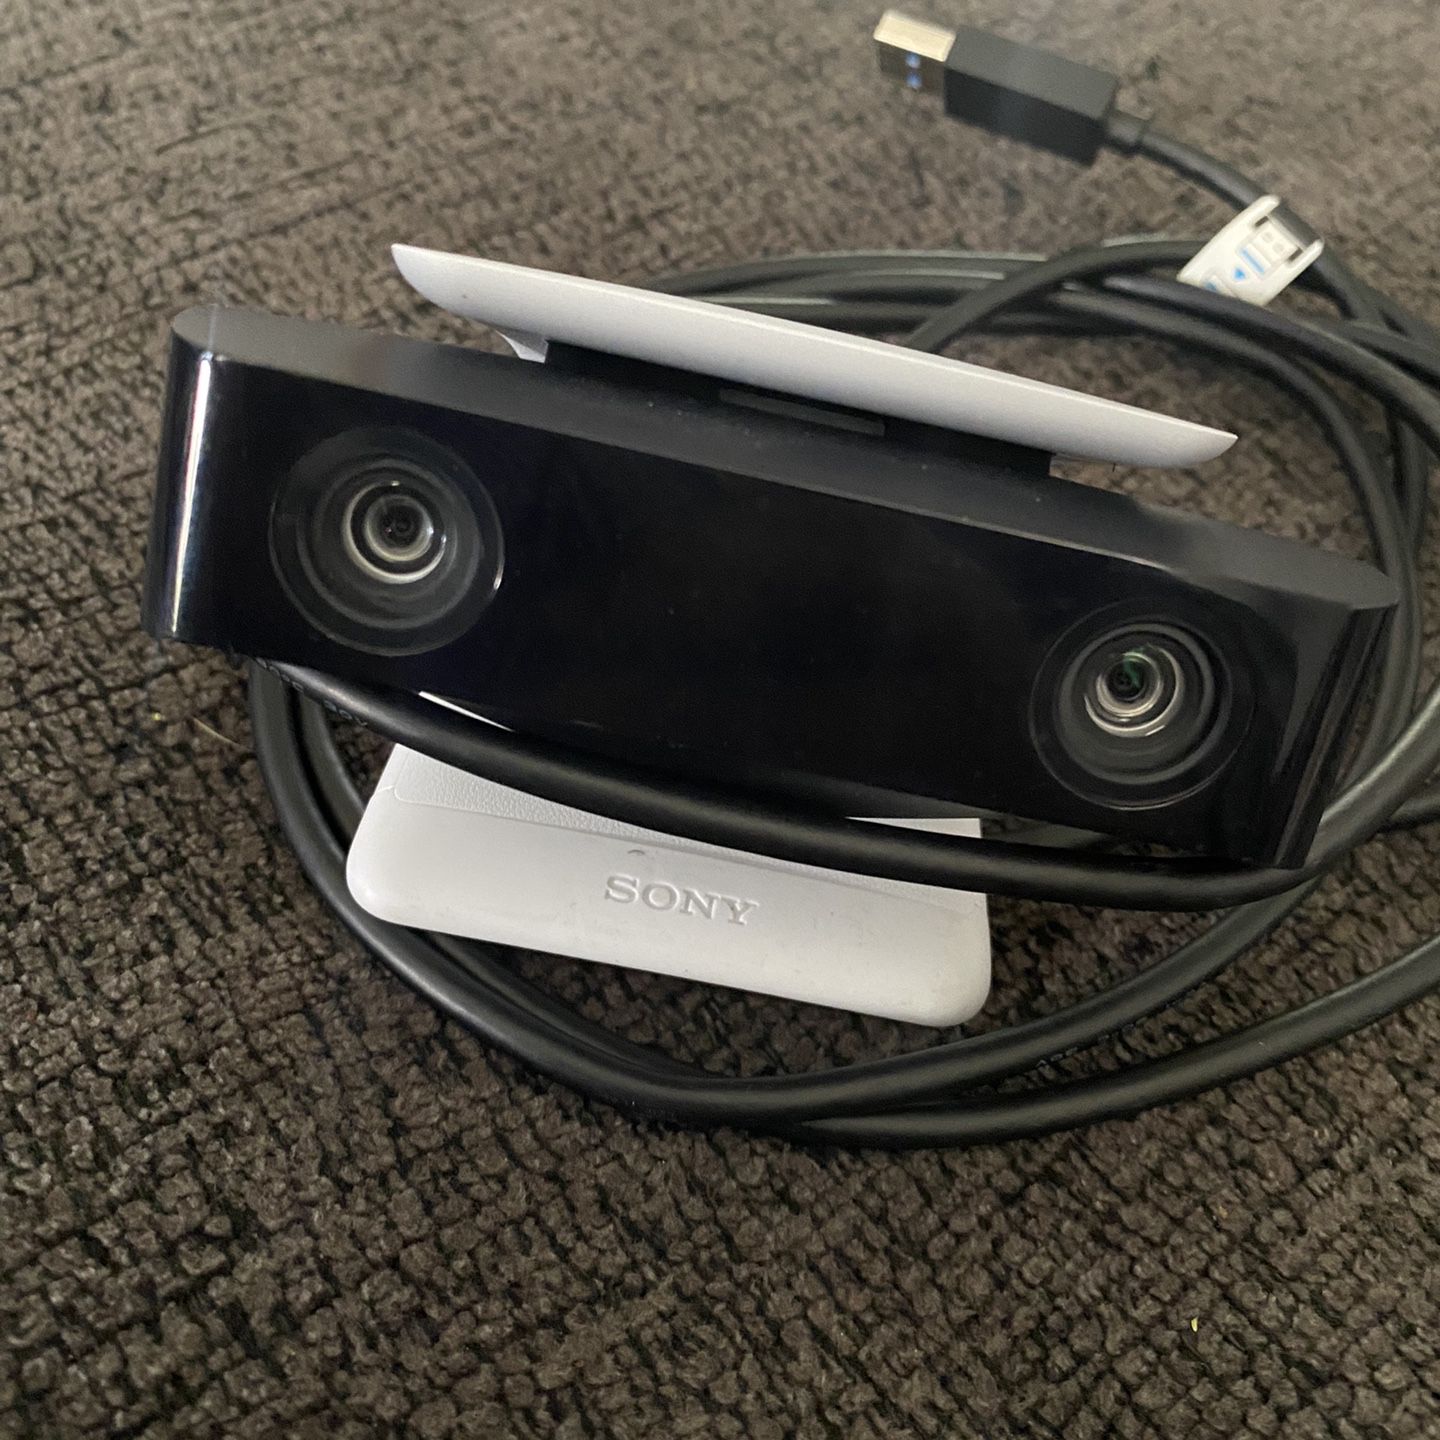 Ps5 Used for Sale in Columbus, OH - OfferUp